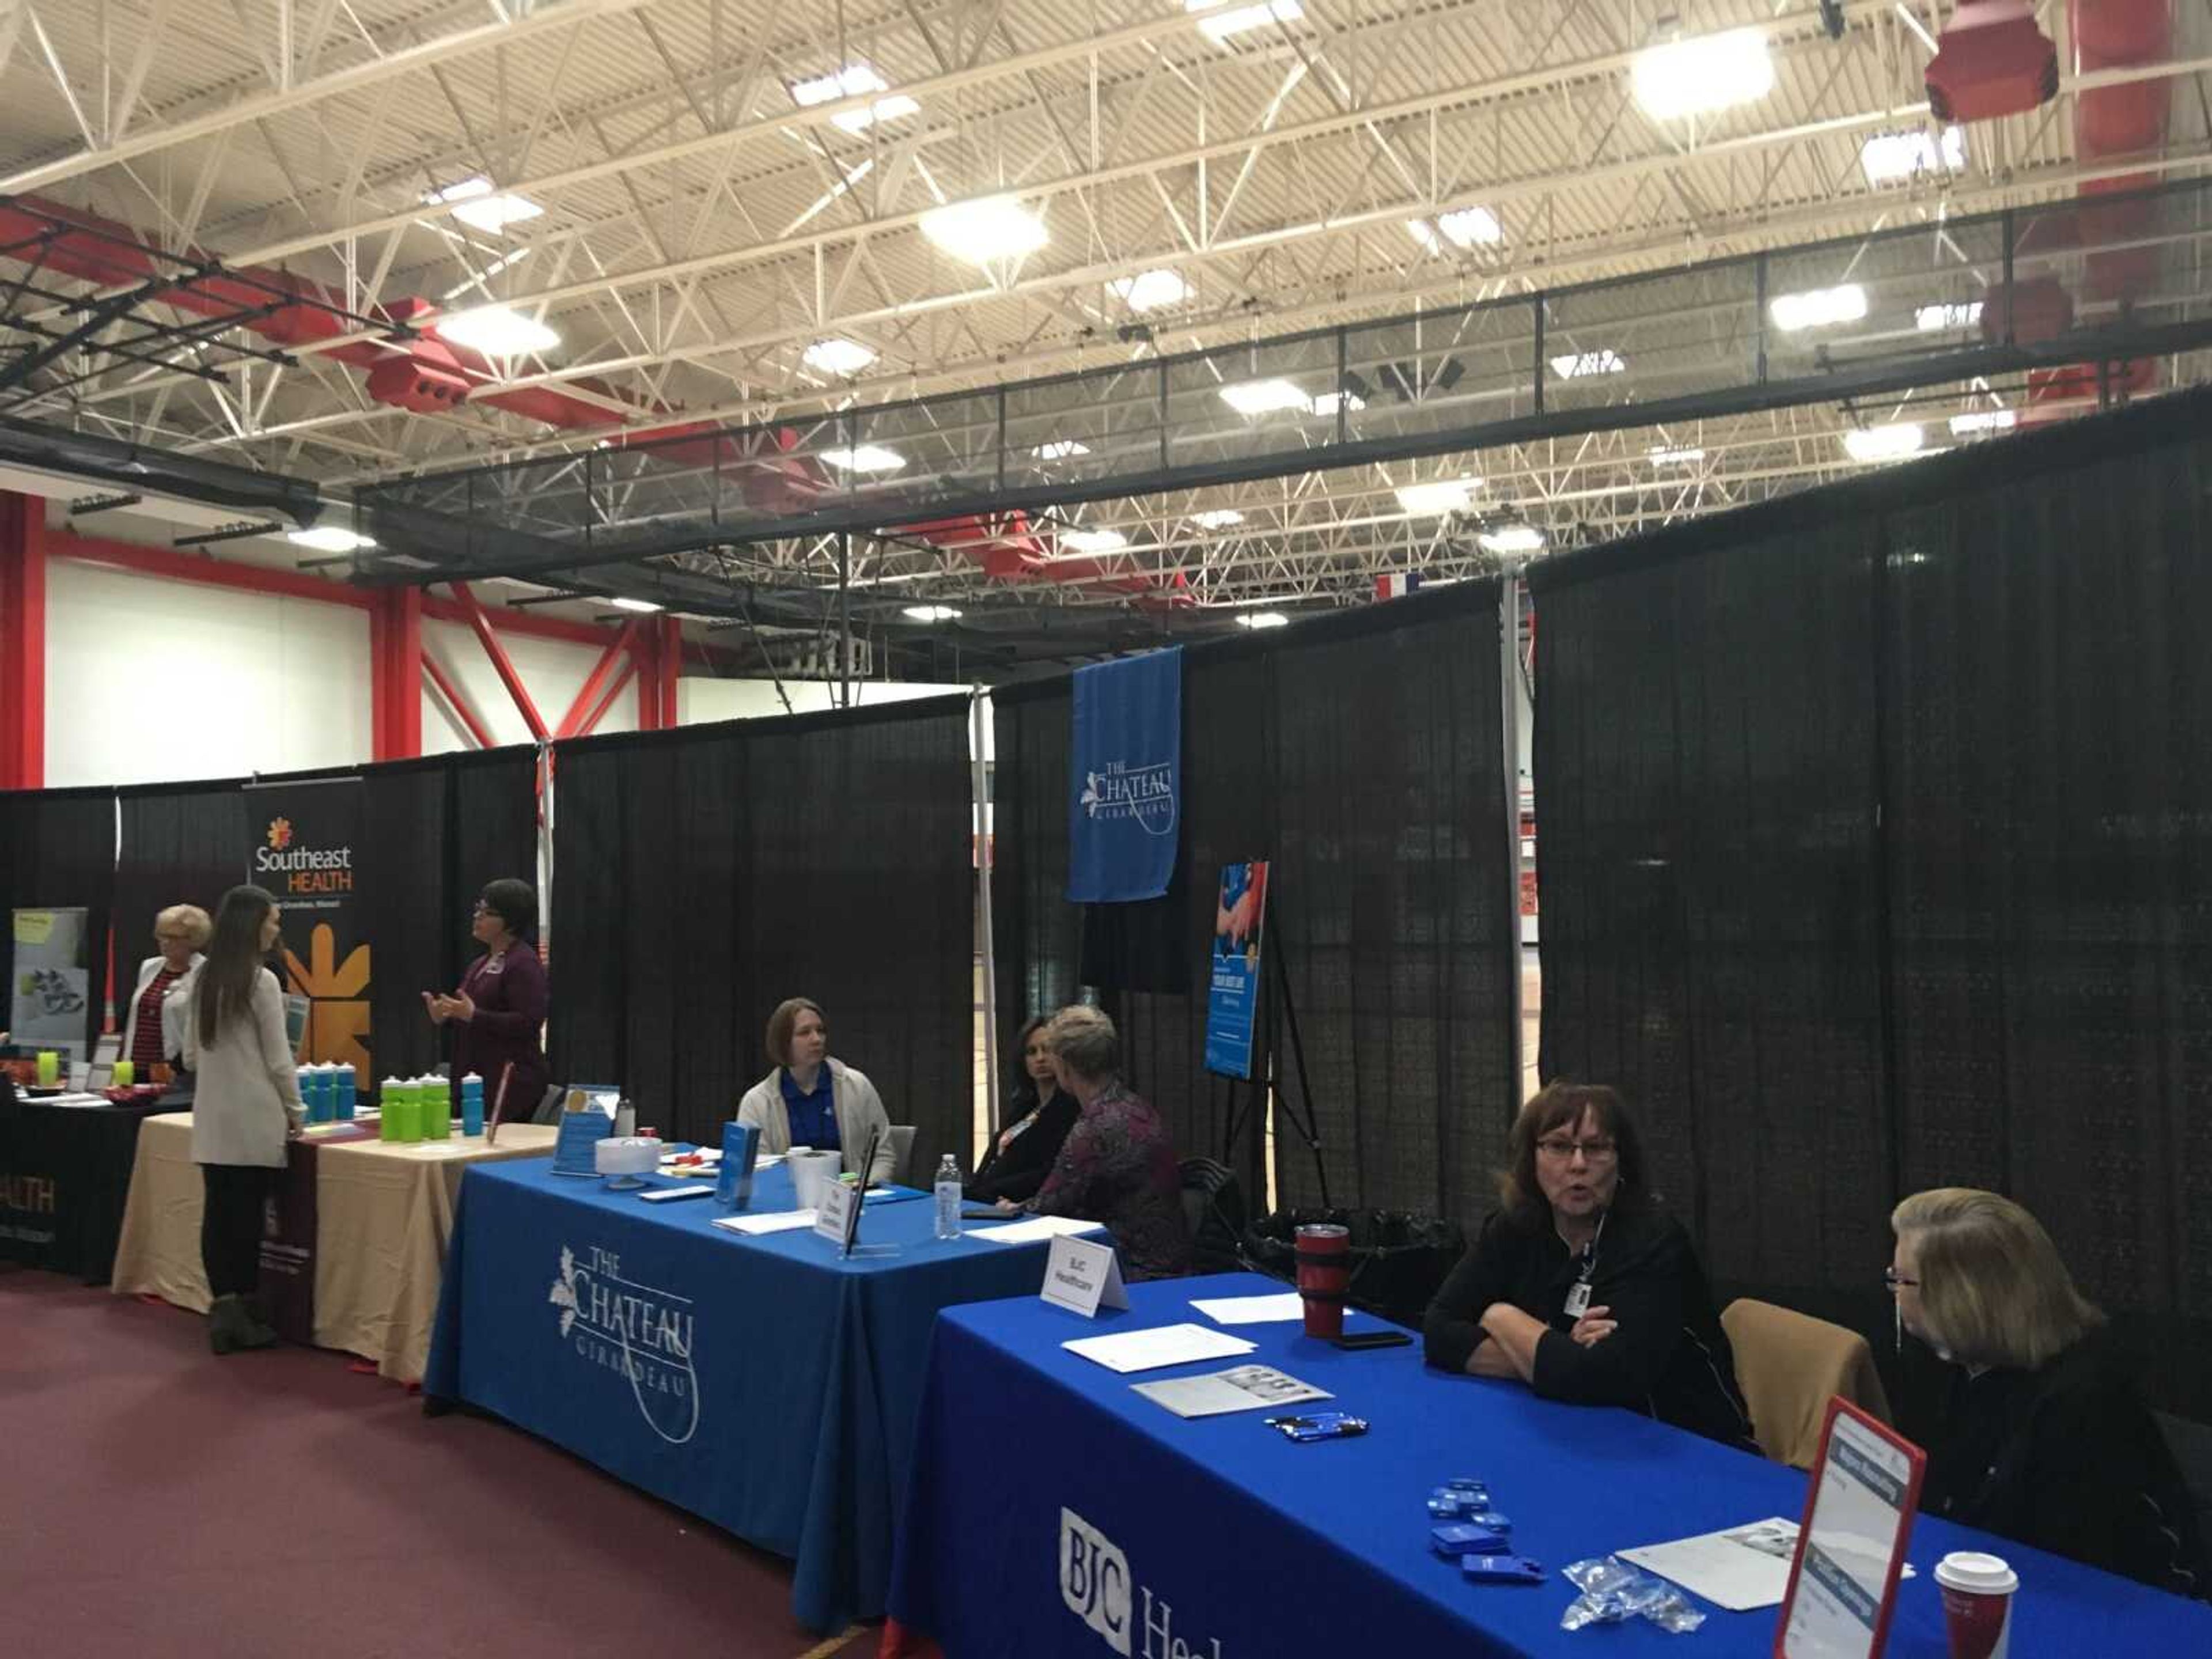 Southeast Health, The Chateau Girardeau and BJC Healthcare tables at the Healthcare Career Expo on Friday, Oct. 12.
Photos by Andrew Myles